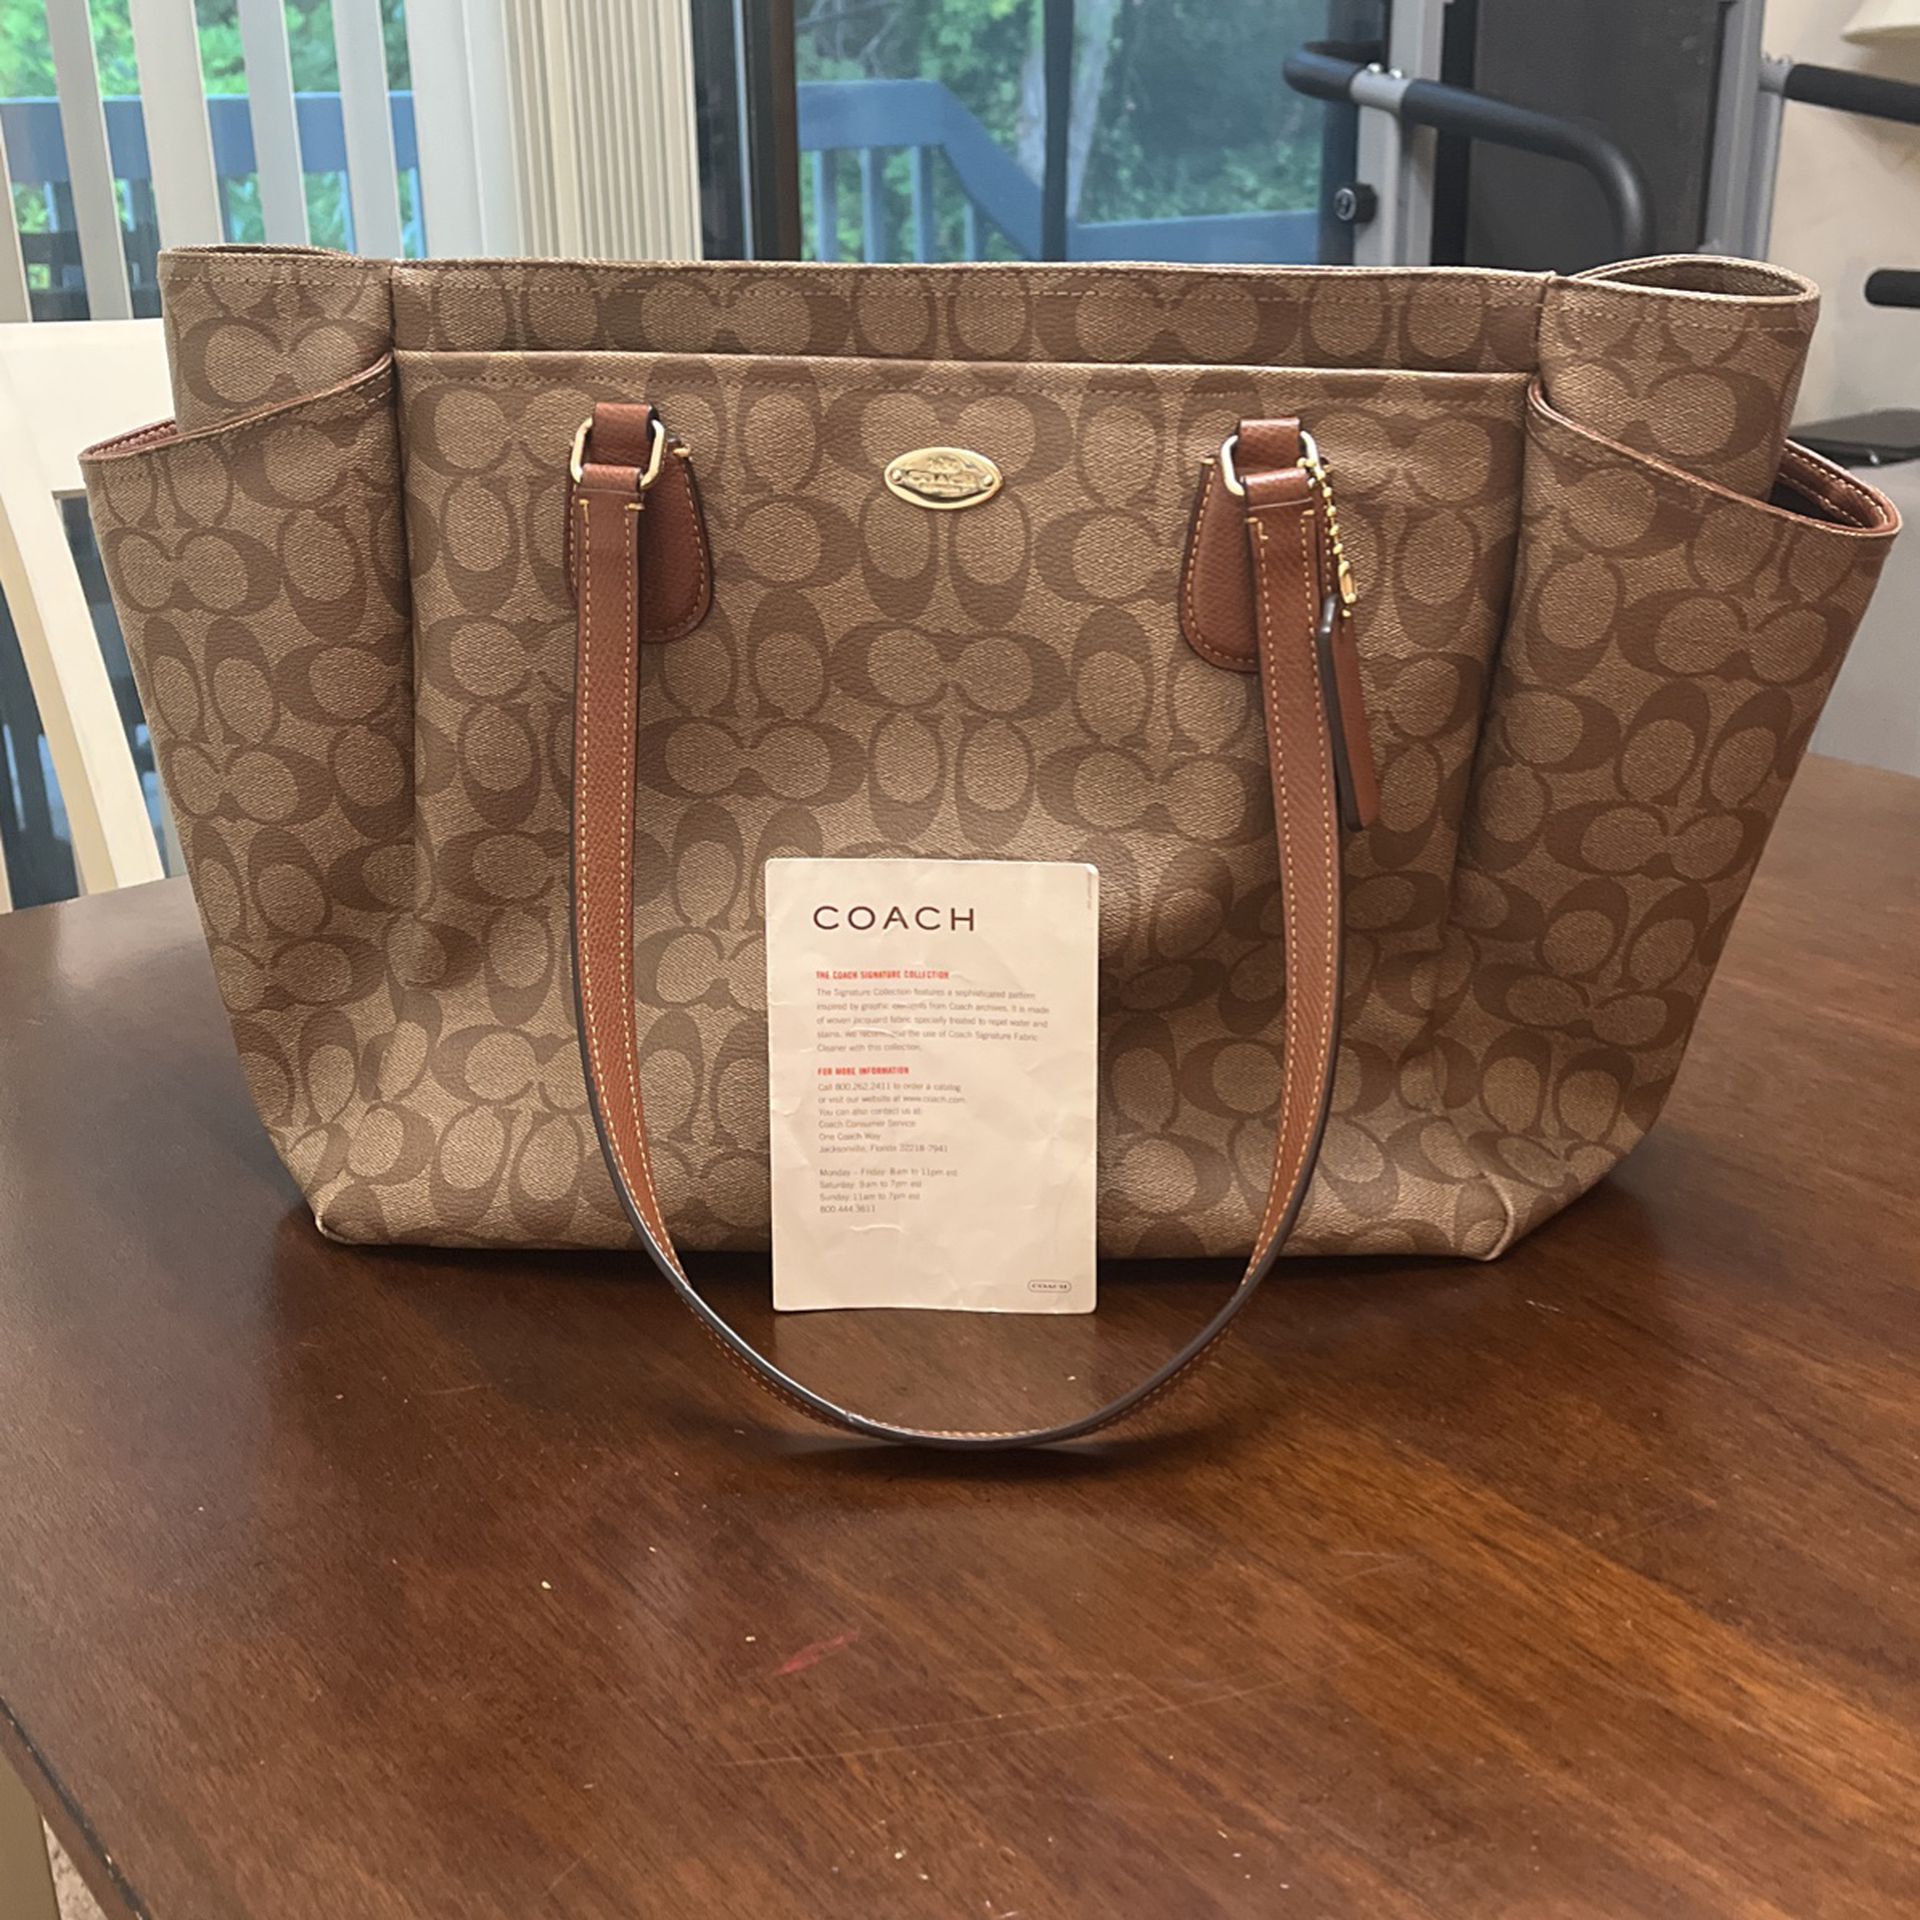 Authentic Coach Baby Bag for Sale in Seattle, WA - OfferUp